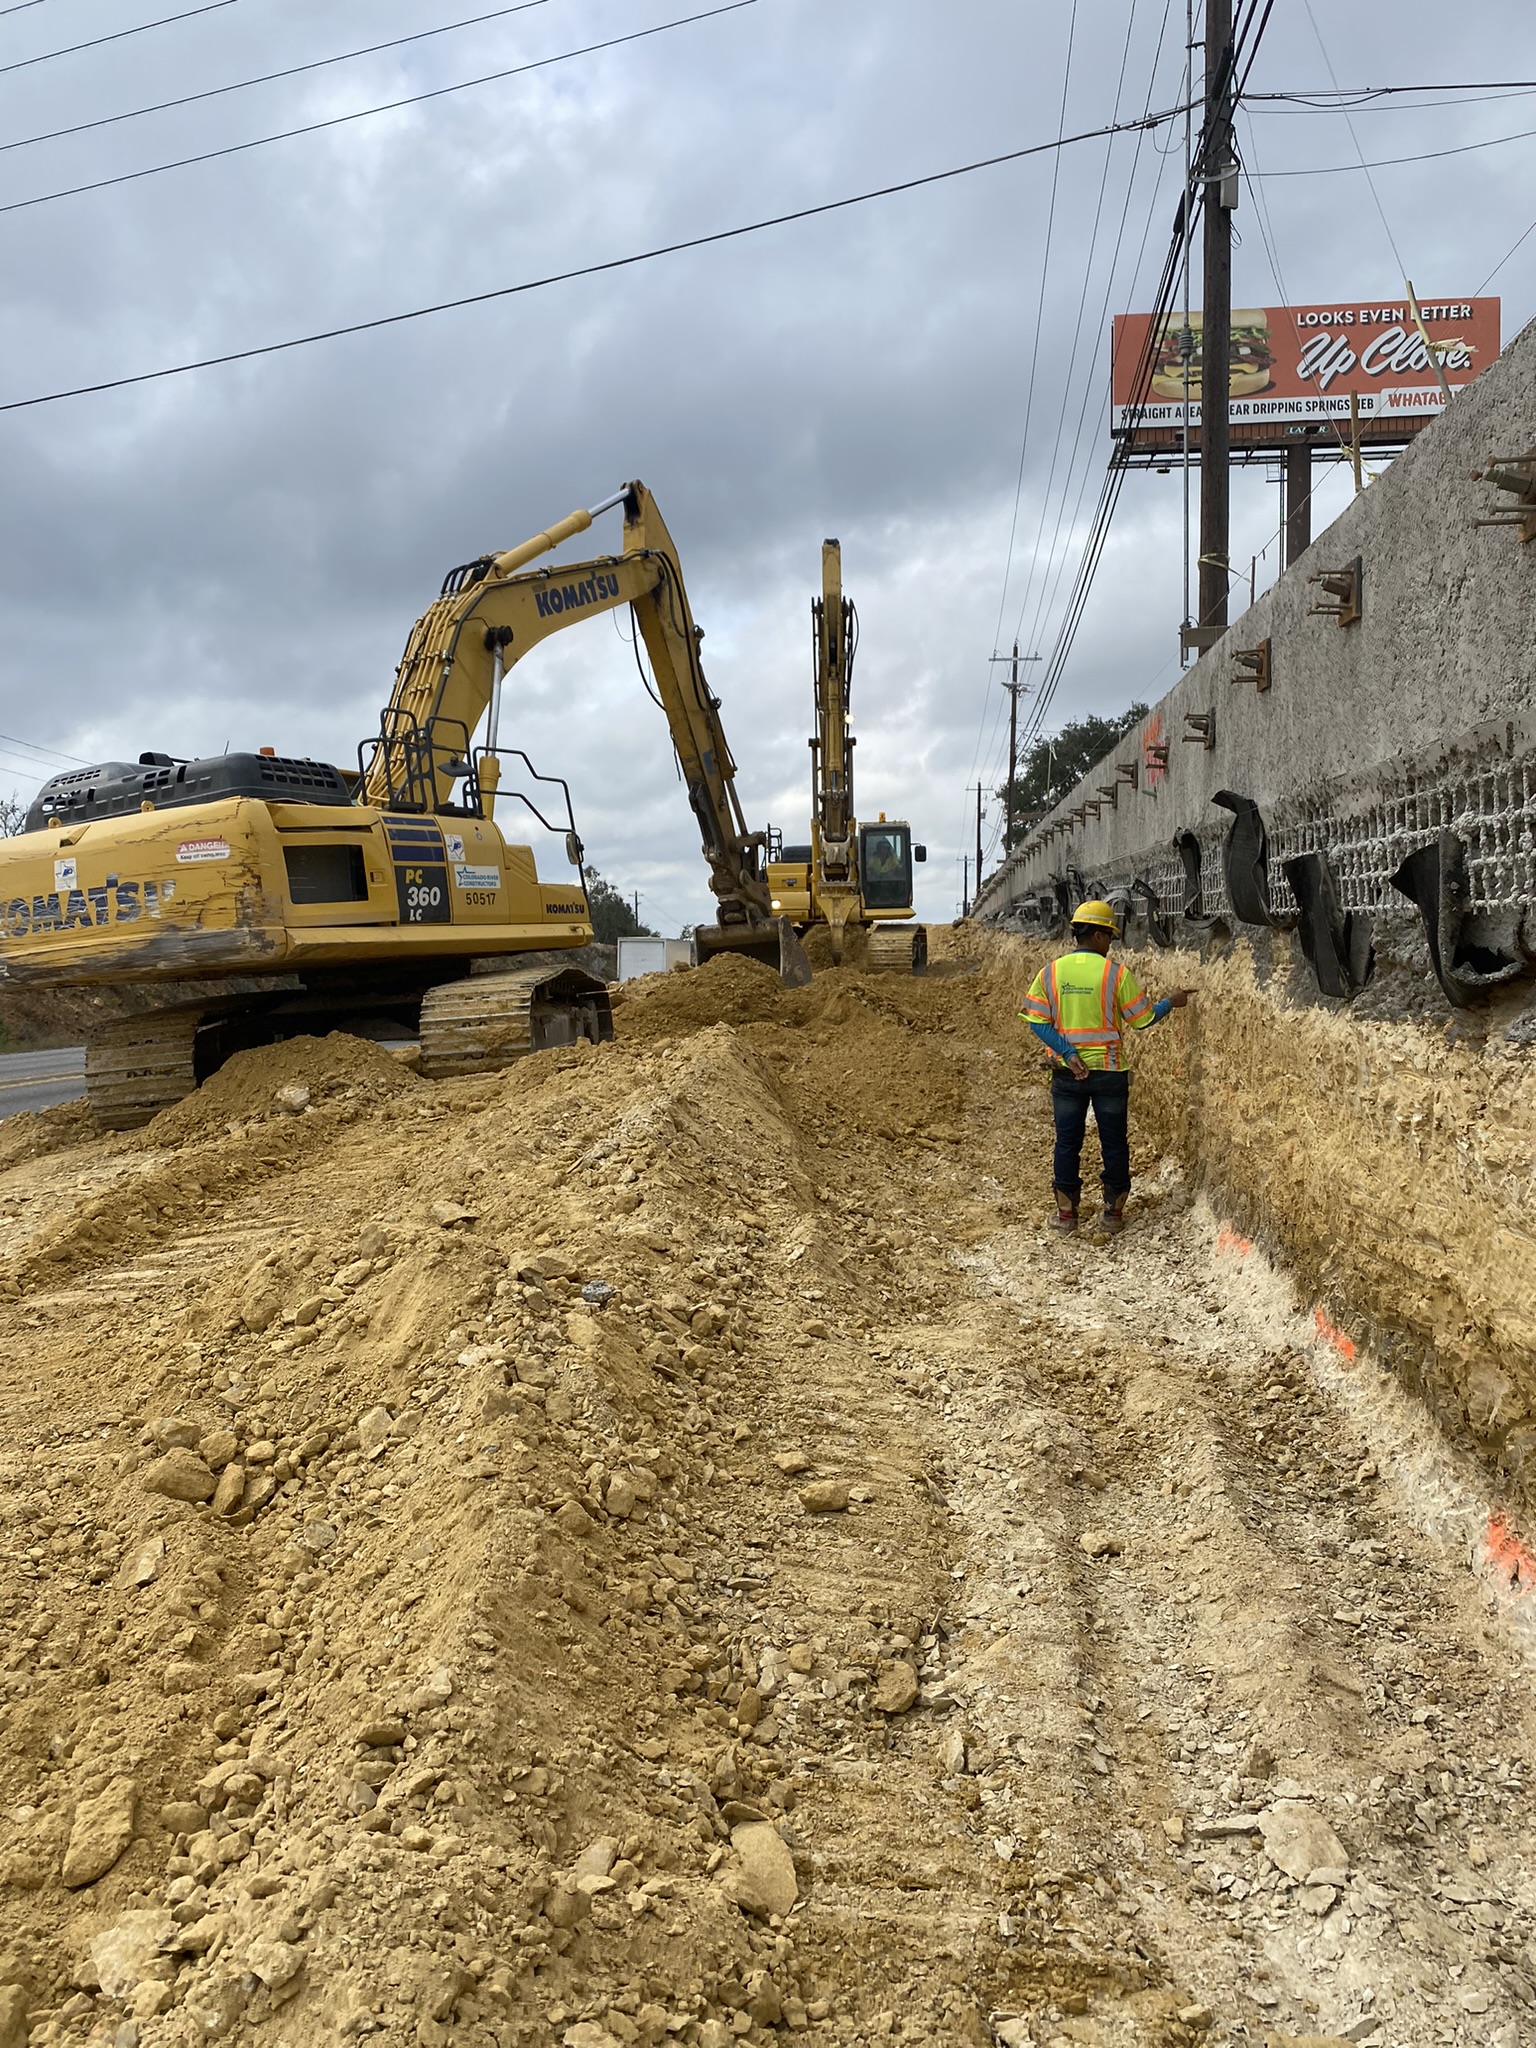 Excavators work to remove soil and rock next to completed sections of a retaining wall This retaining wall is built from top-to-bottom five feet at a time to hold rock in place while excavating to a lower grade. December 2021